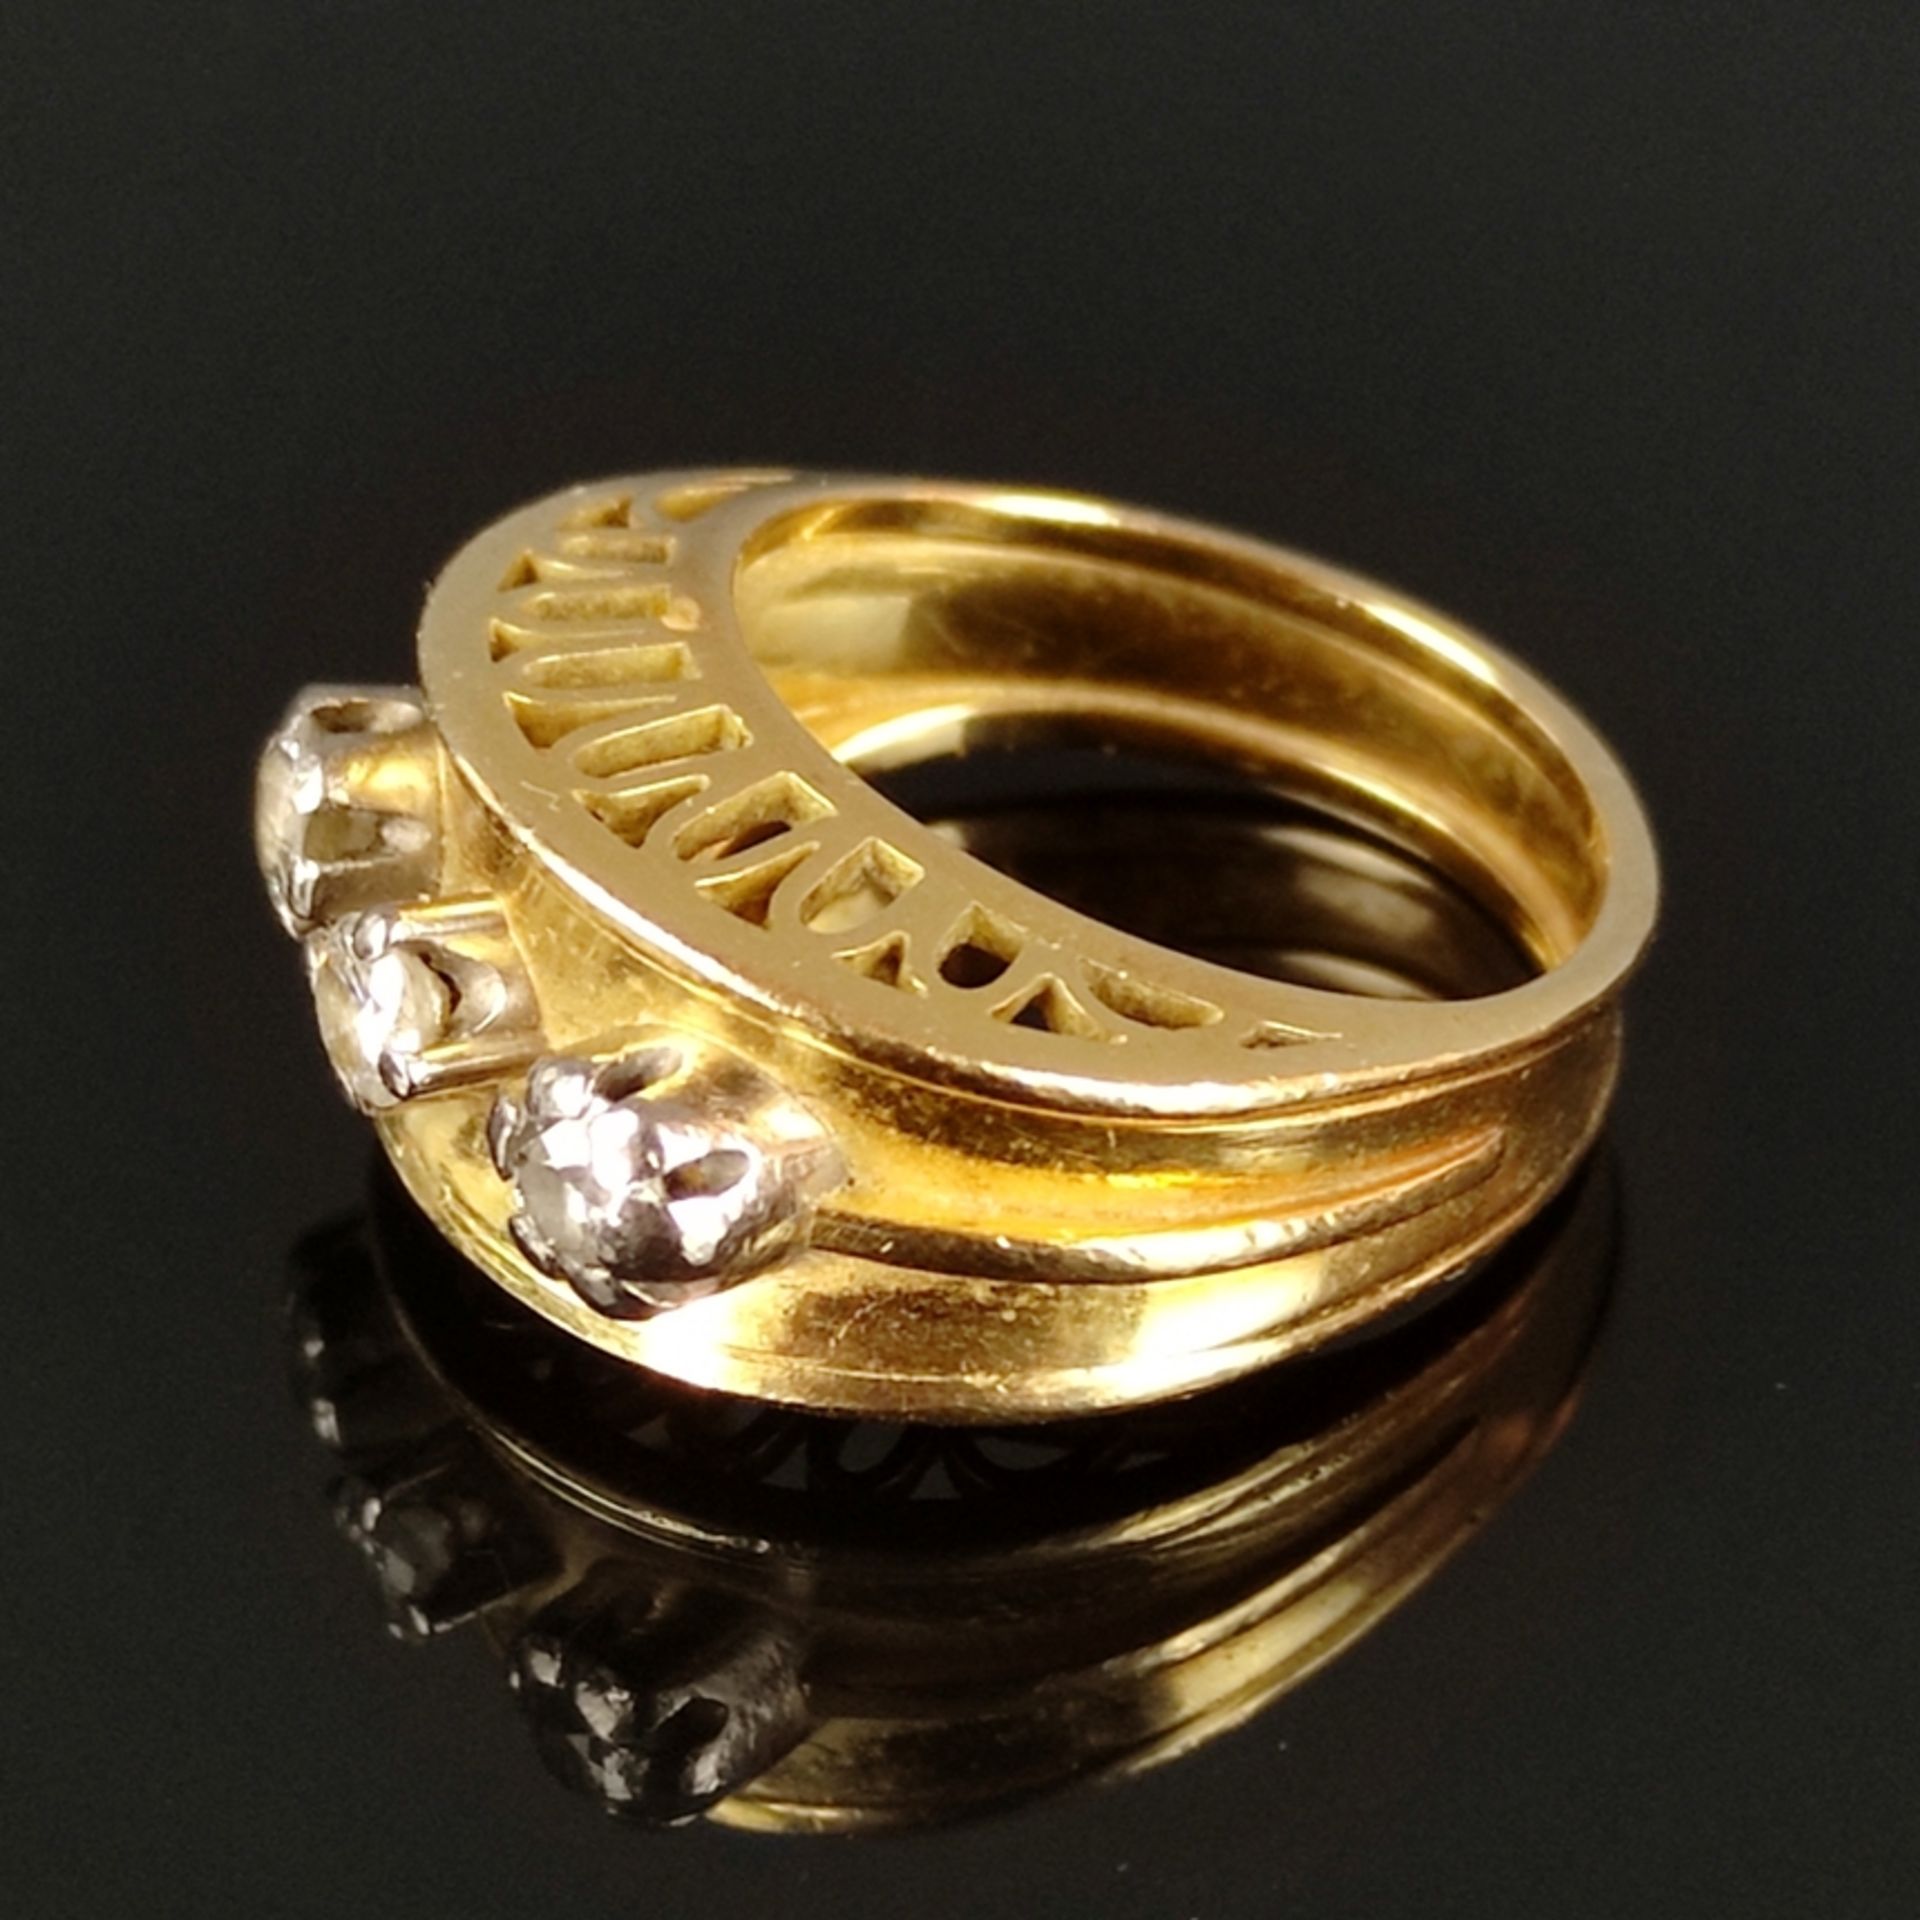 Diamond ring, 750/18K yellow gold (hallmarked), 7.1g, the wide front side worked in a deep pattern 